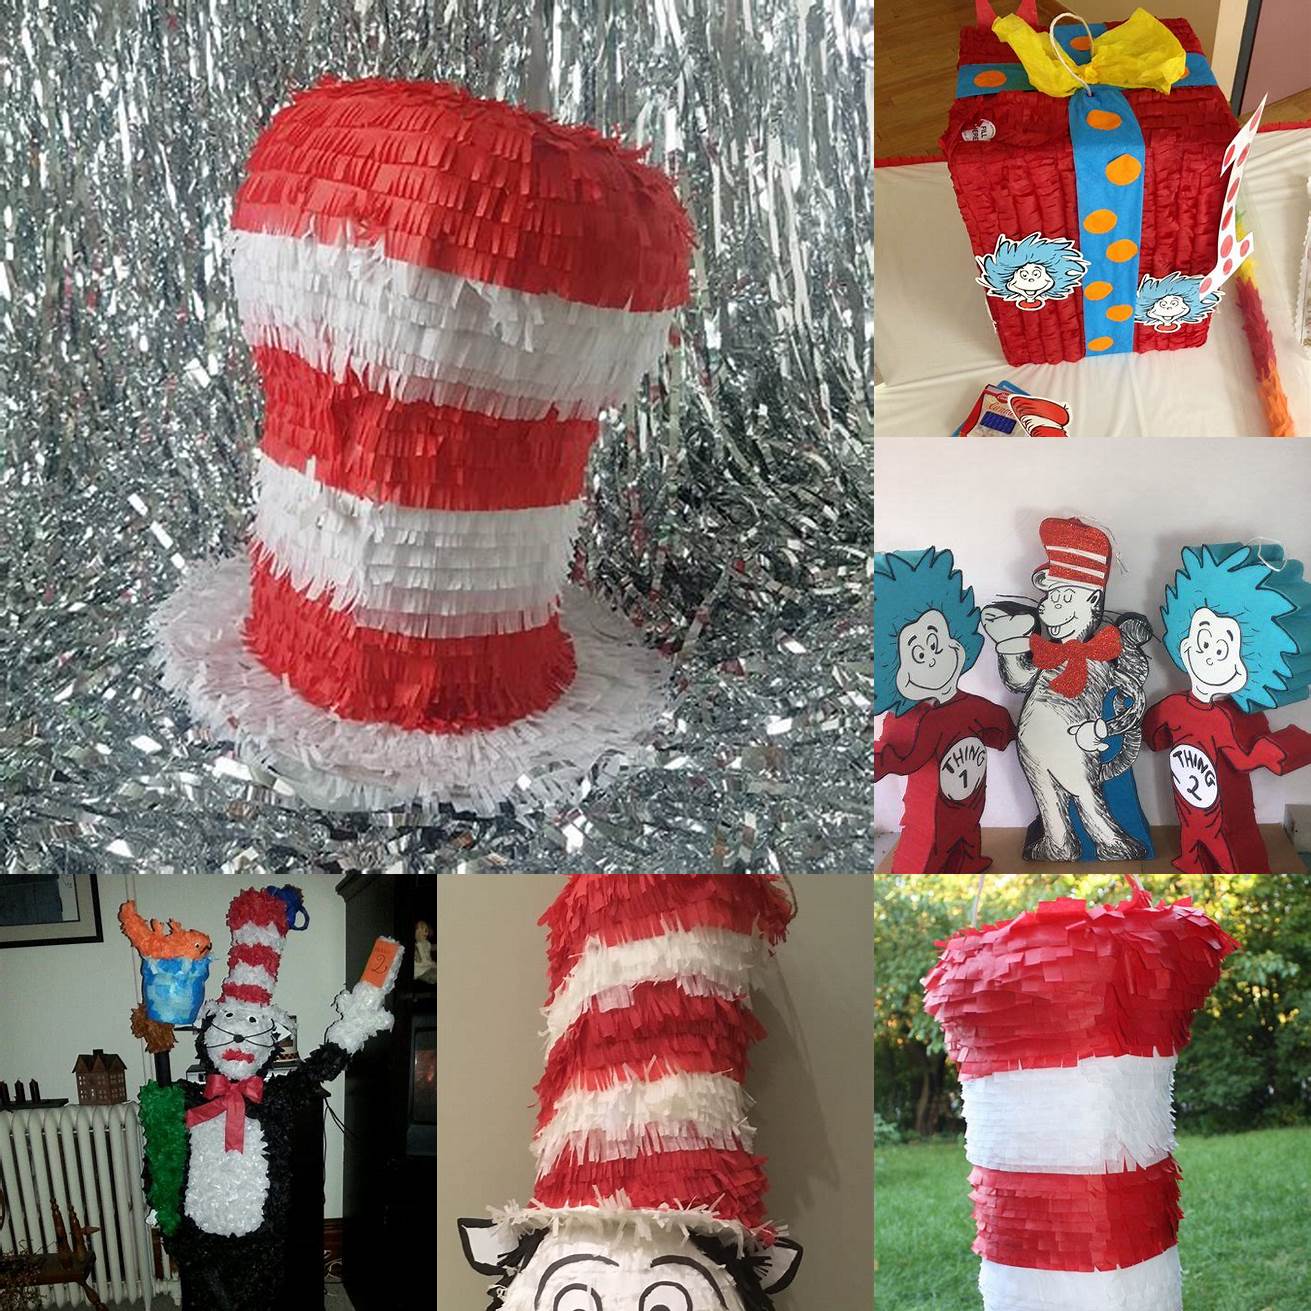 2 Cat in the Hat Pinata hanging from a tree